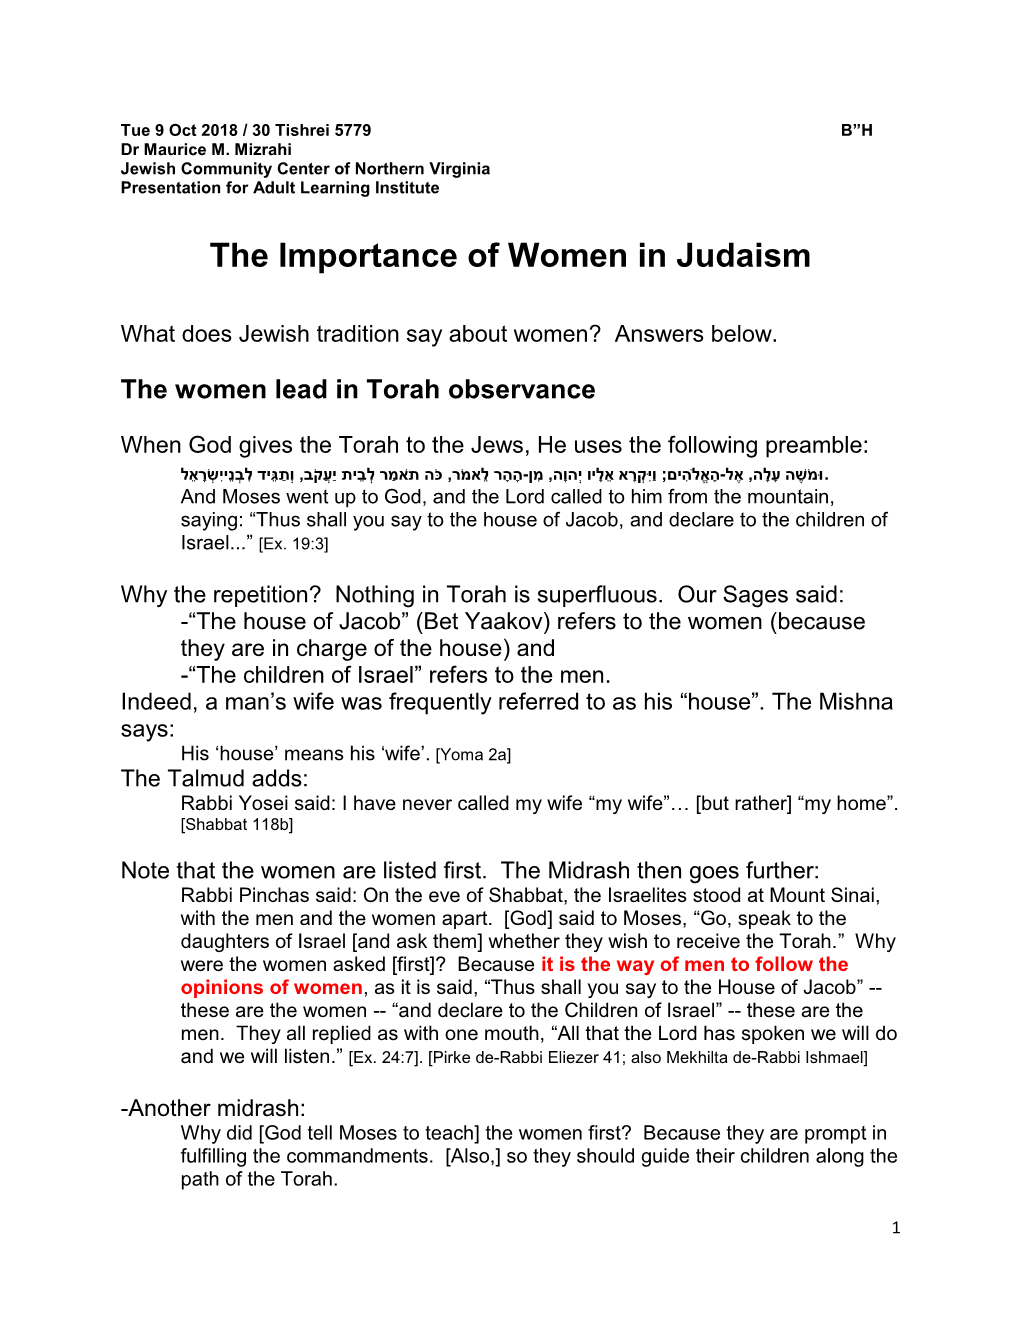 The Importance of Women in Judaism